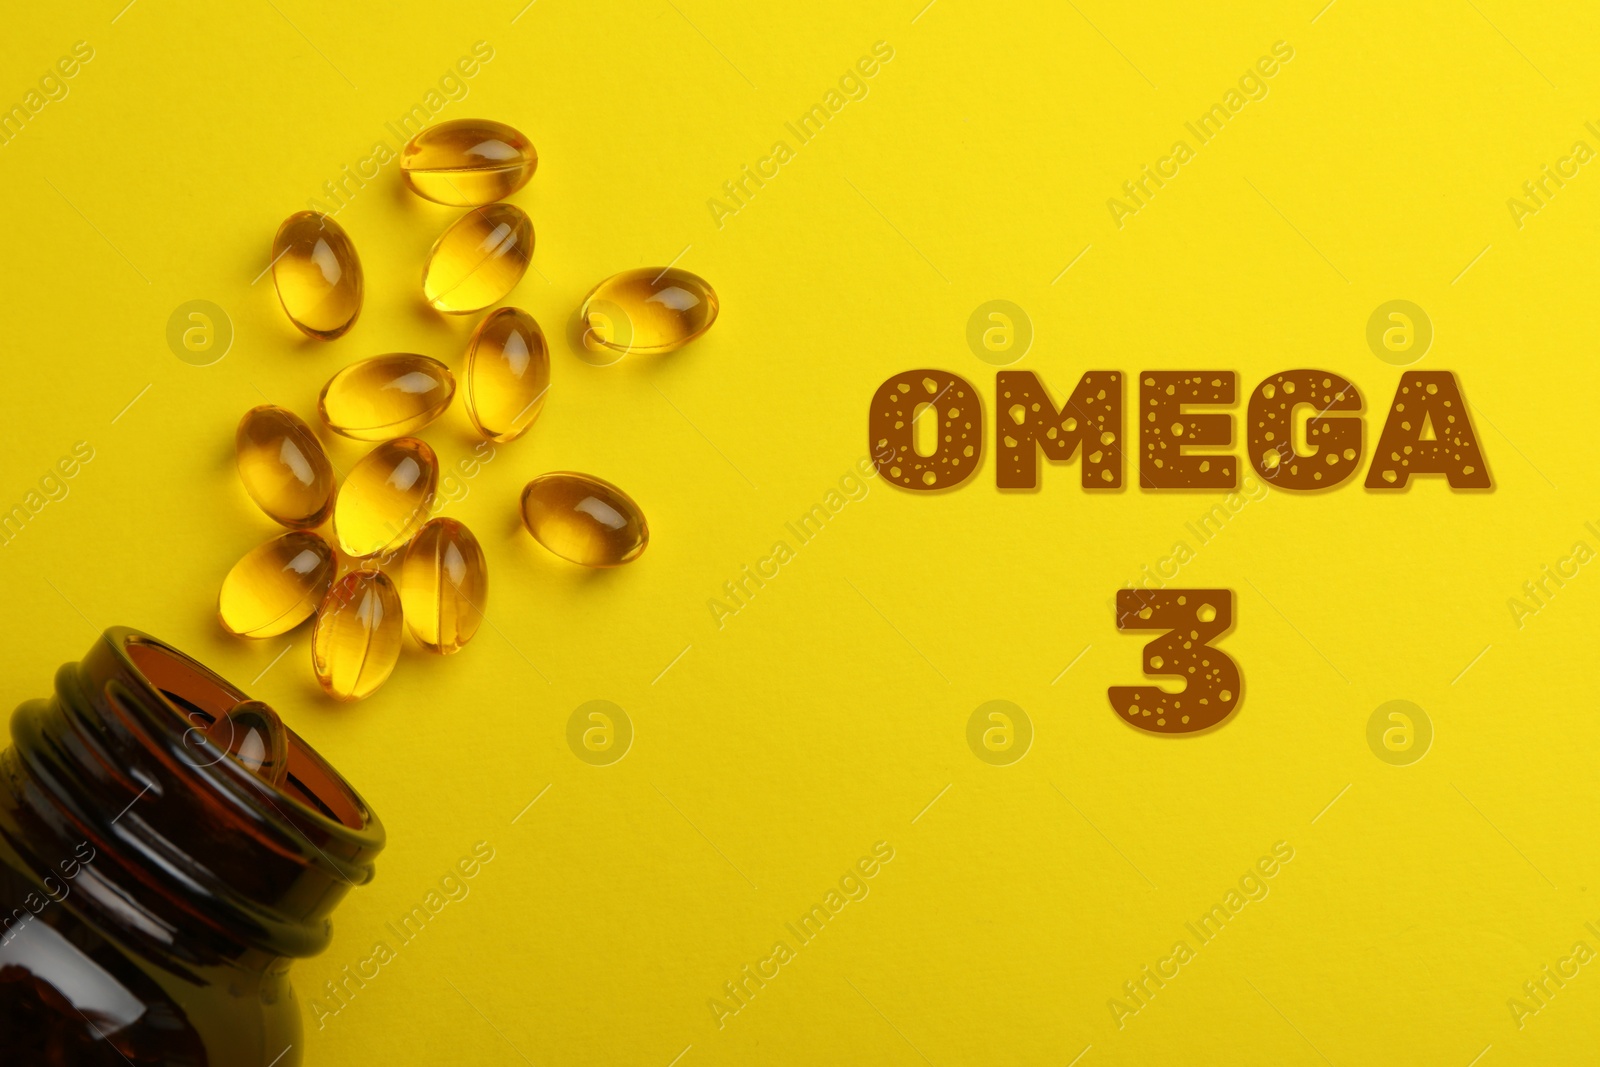 Image of Omega 3. Bottle and fish oil capsules on yellow background, top view